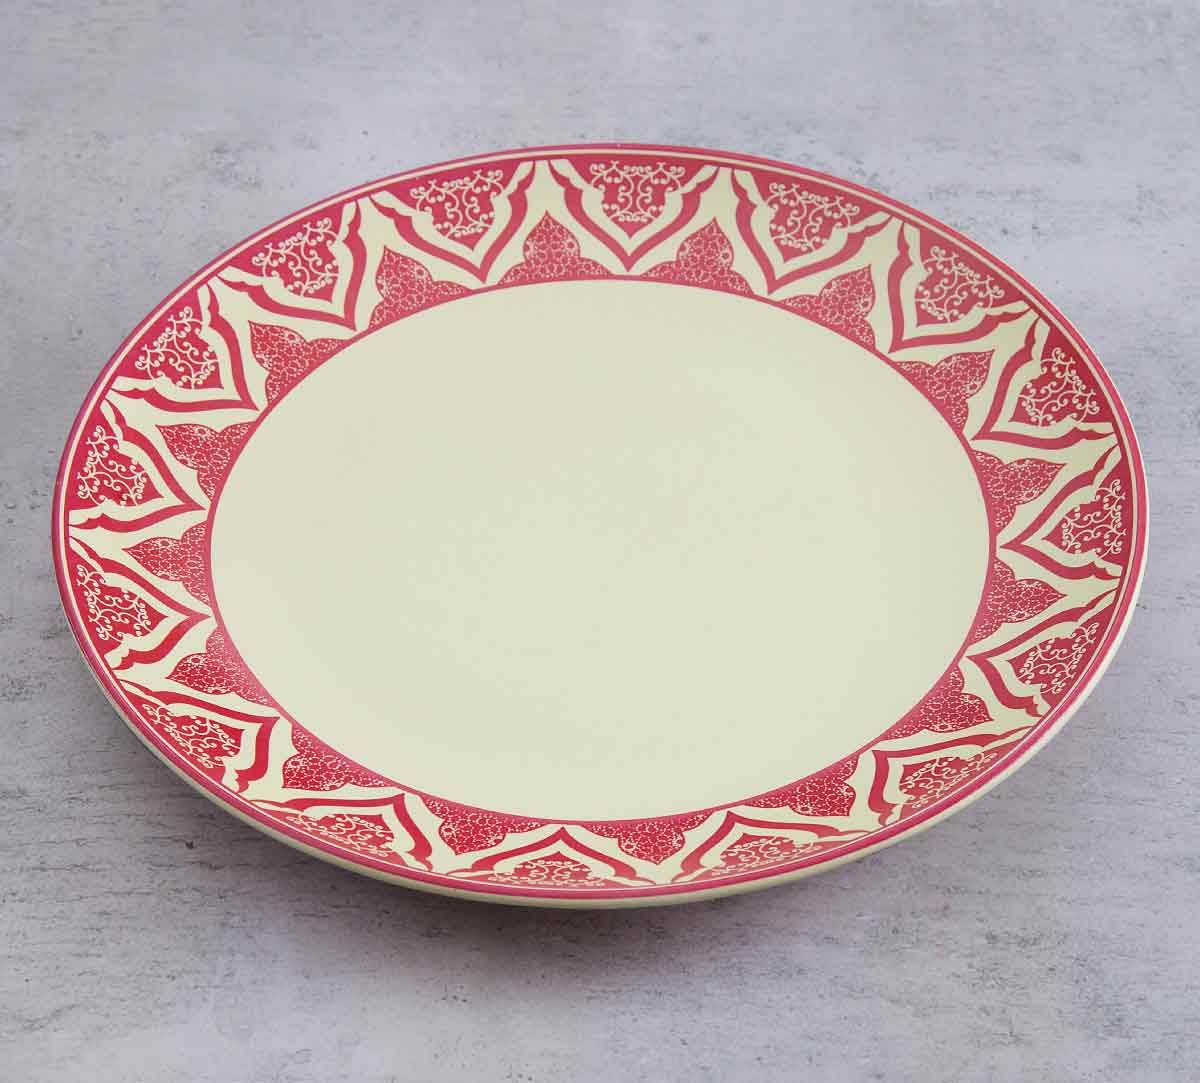 Dinner Plates Online Buy Dinner Plate Sets On India Circus 